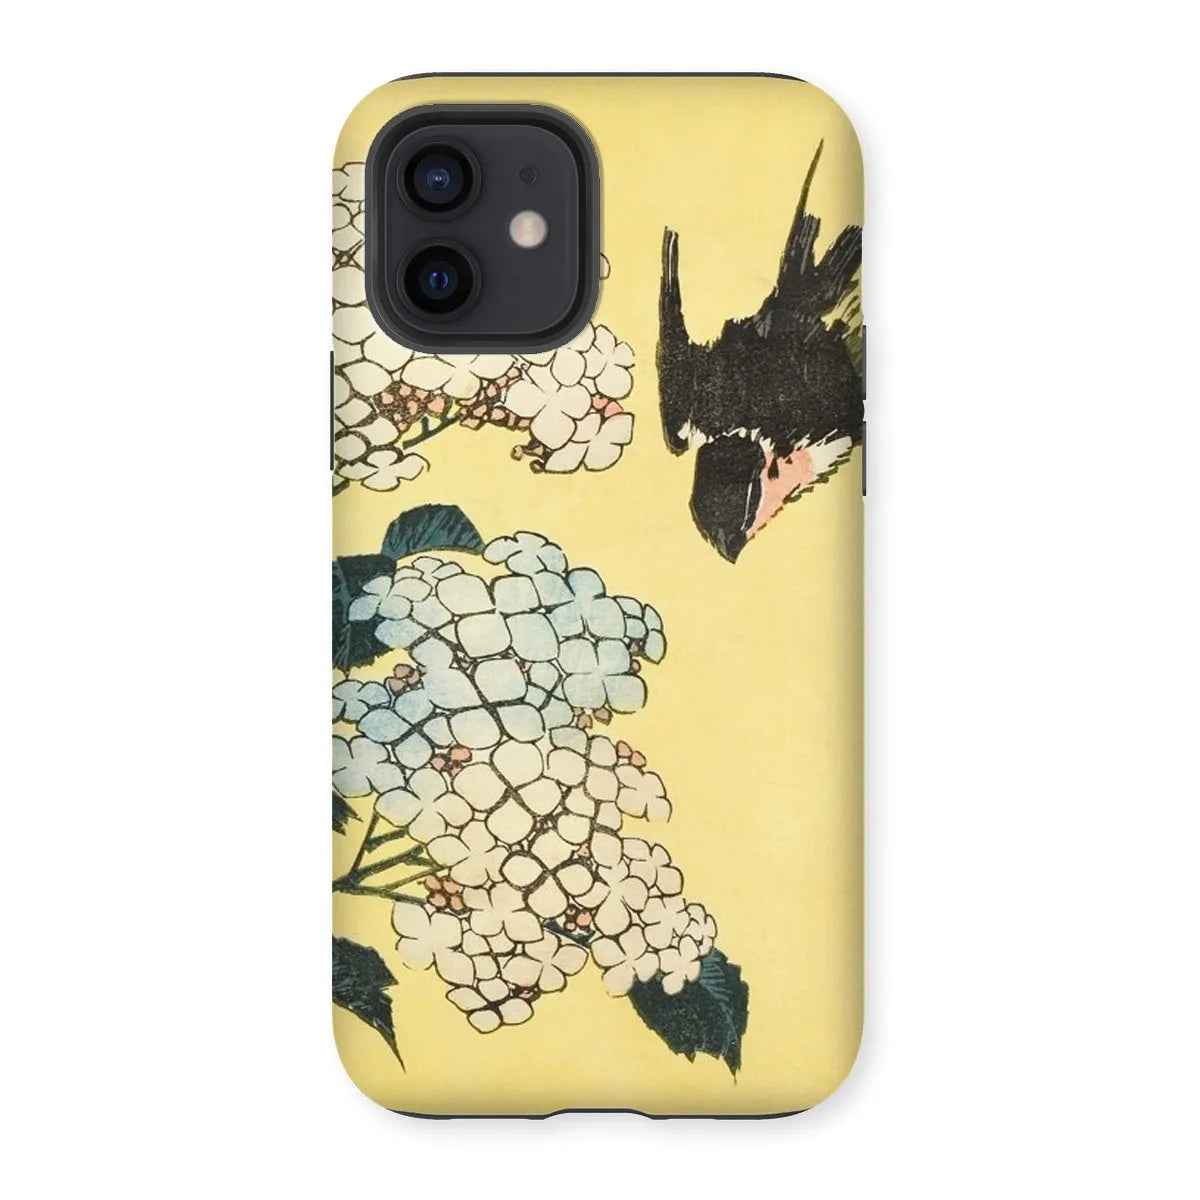 Hydrangea And Swallow - Japanese Art Phone Case - Hokusai - Iphone 12 / Matte - Mobile Phone Cases - Aesthetic Art